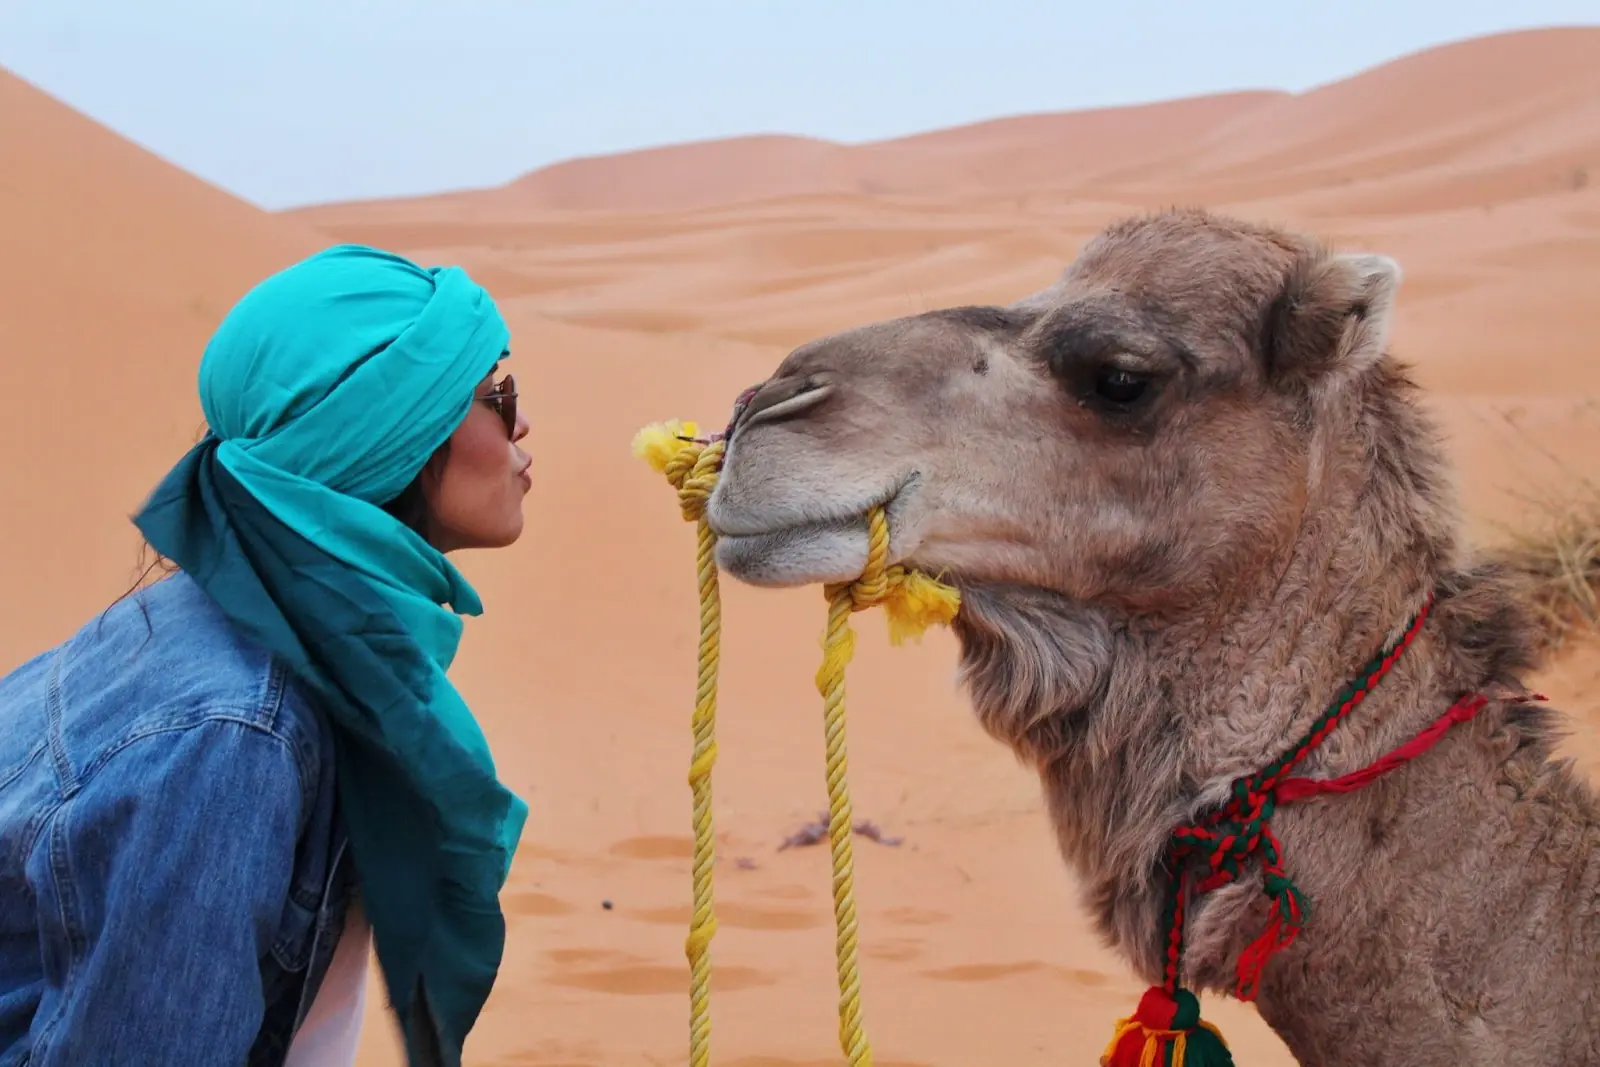 A women steering into the eyes of a camel at close range. 